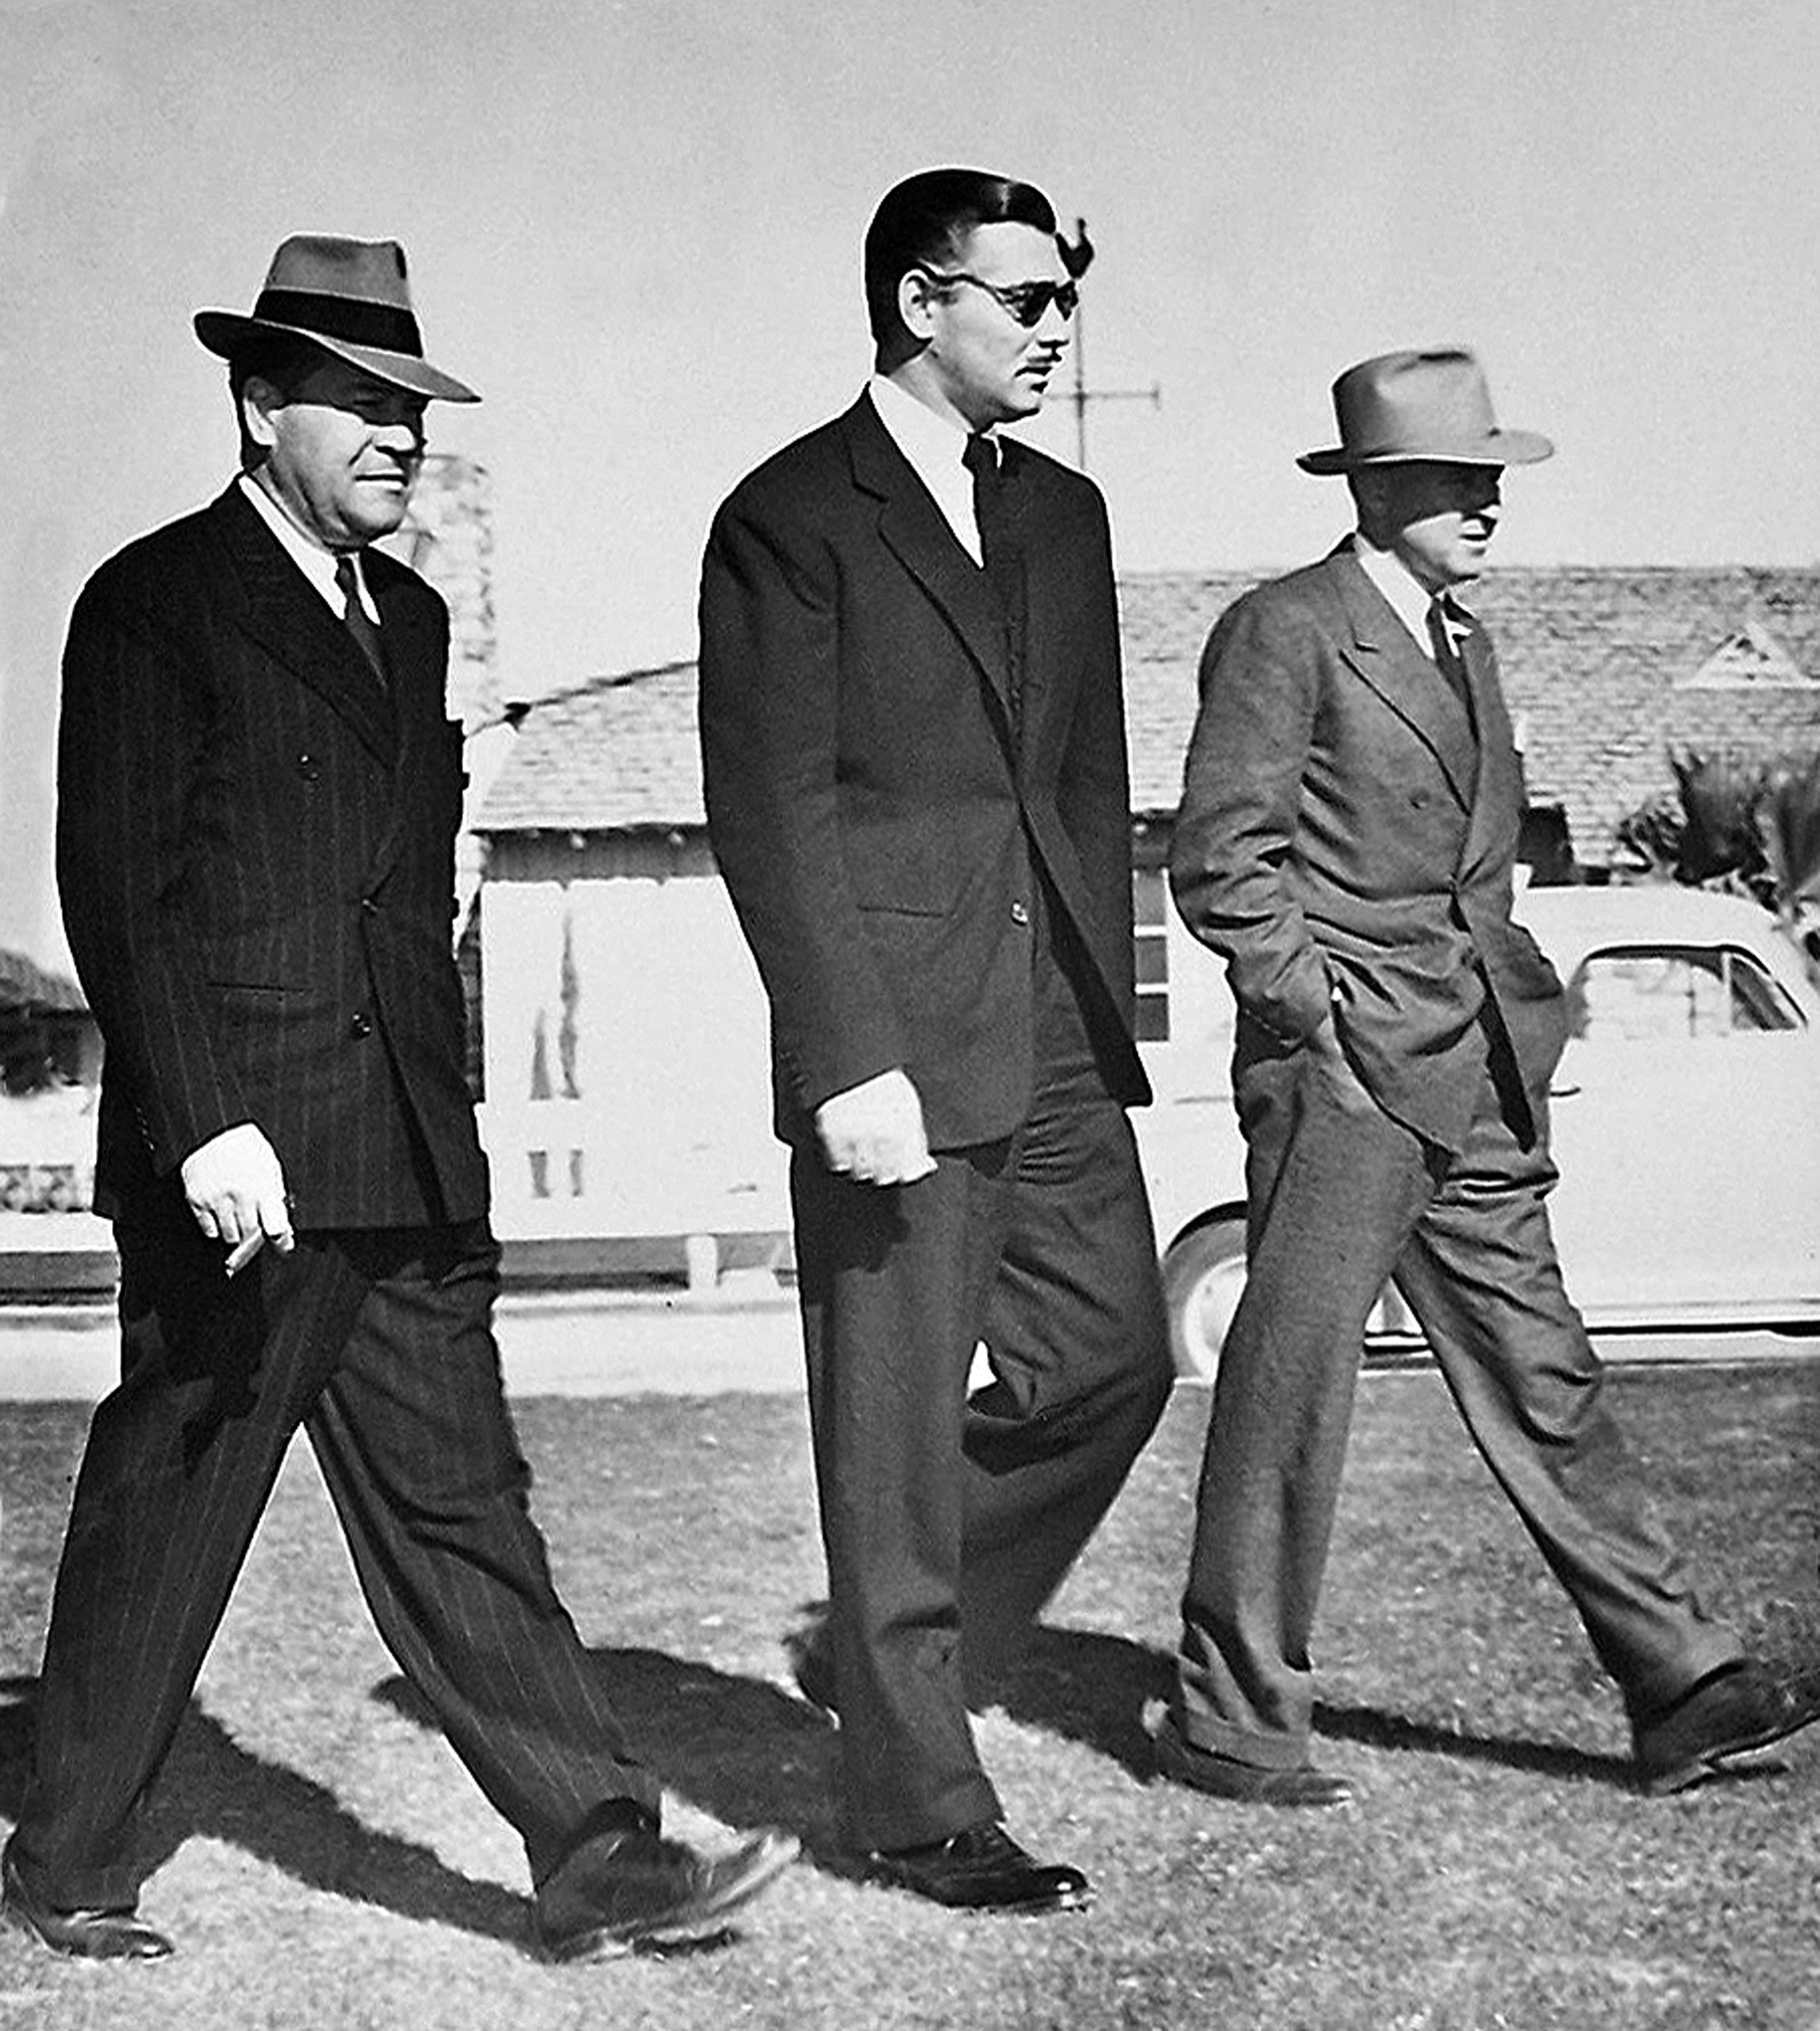 Three days after the crash of Flight 3, Clark Gable emerges from his bungalow at the El Rancho Las Vegas with MGM VP Eddie Mannix and Gable friend Al Menasco. Their task is to choose caskets for Gable’s wife, mother-in-law, and best friend.